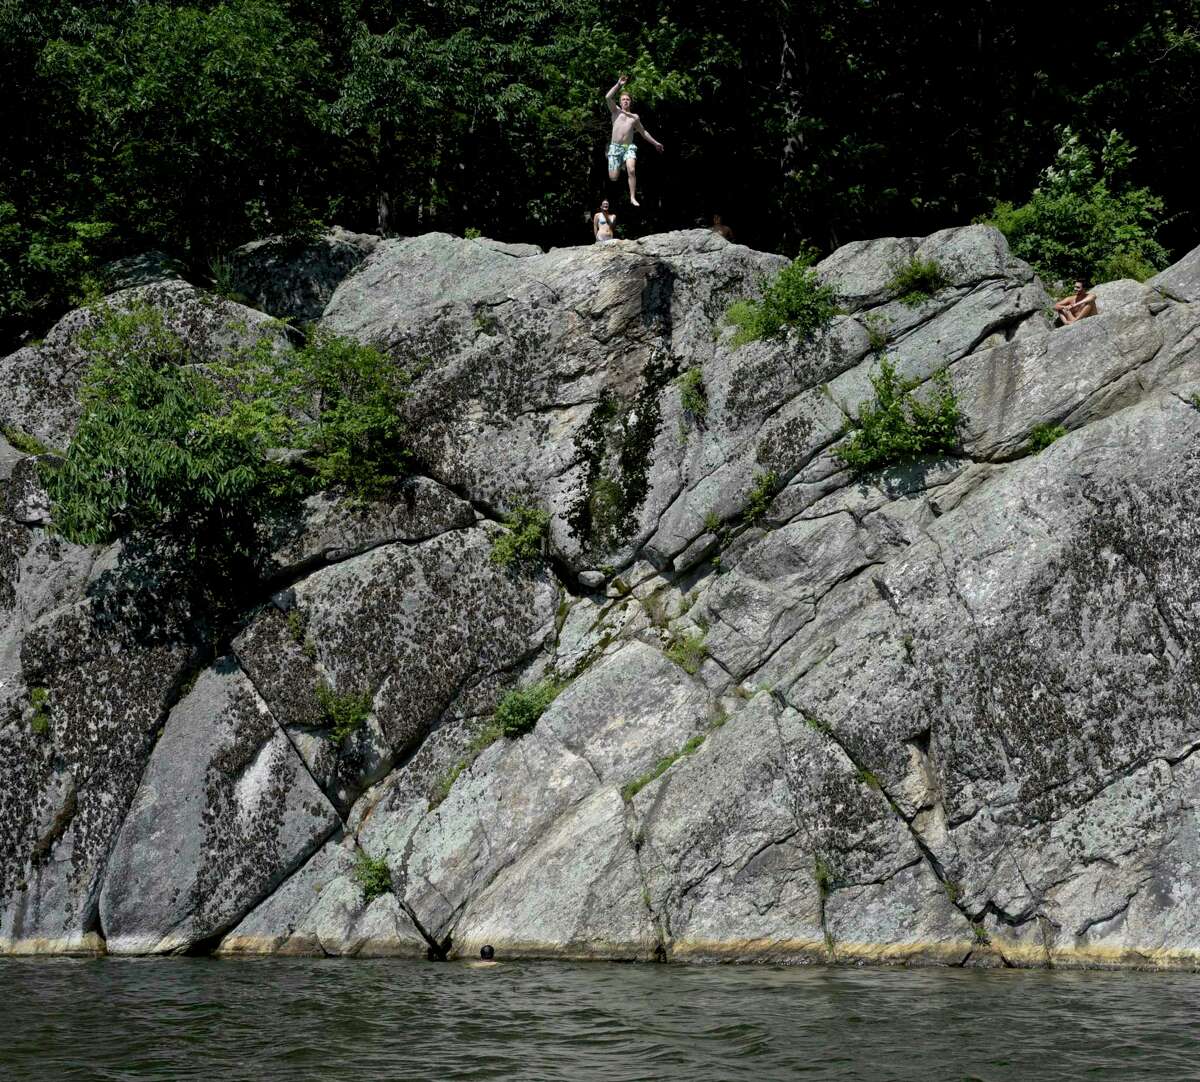 People jump from the cliffs in Richardson Park into Mamanasco Lake. Friday, July 30, 2021, in Ridgefield, Conn.